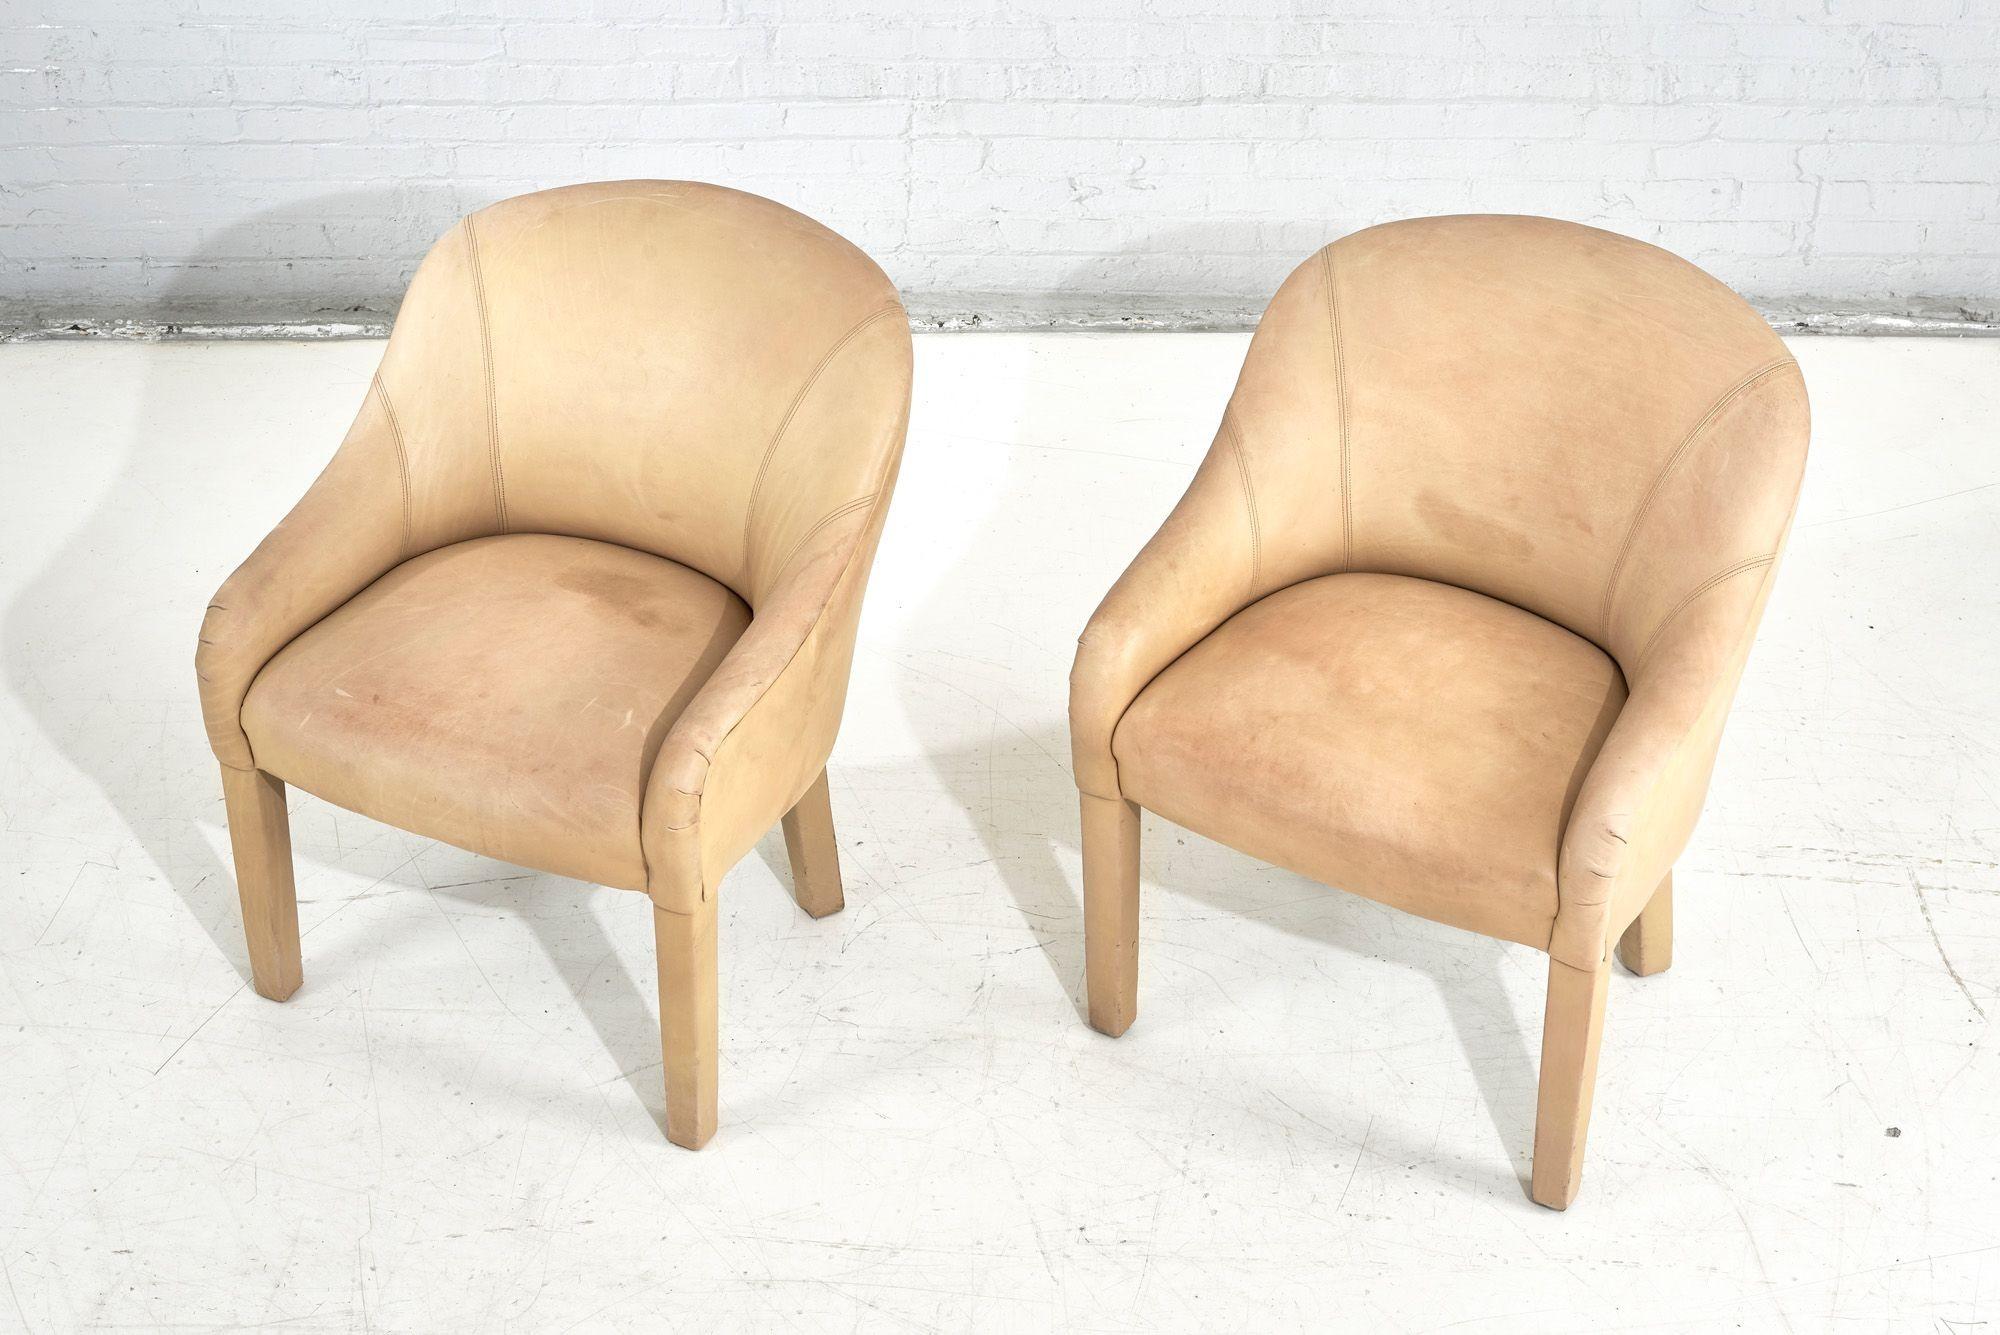 Sally Sirkin for Robert Scott Pair of Leather Arm Chairs, 1970 In Good Condition For Sale In Chicago, IL